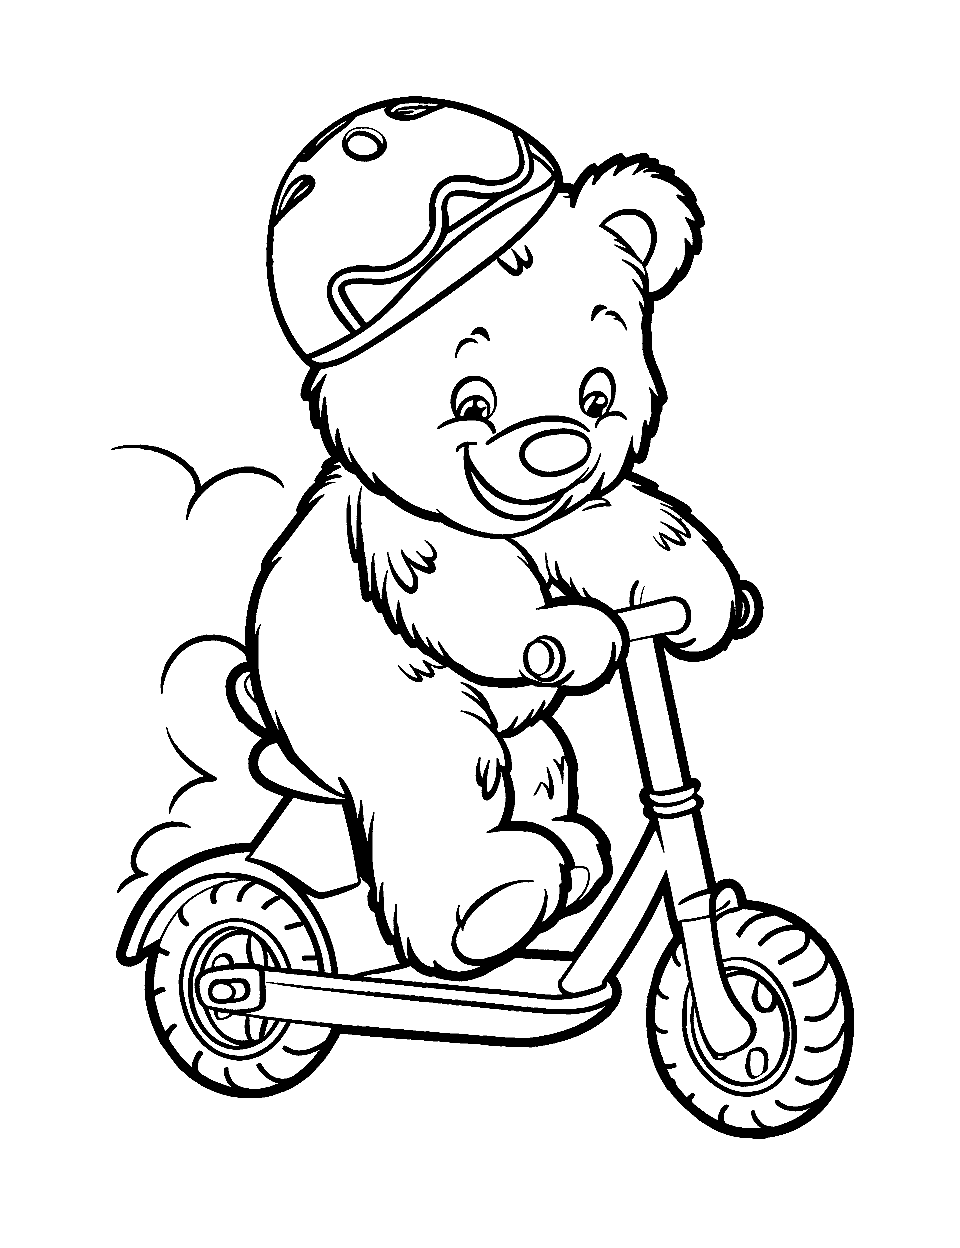 Teddy Bear with a Scooter Coloring Page - A teddy bear riding an electric scooter, helmet on the head.